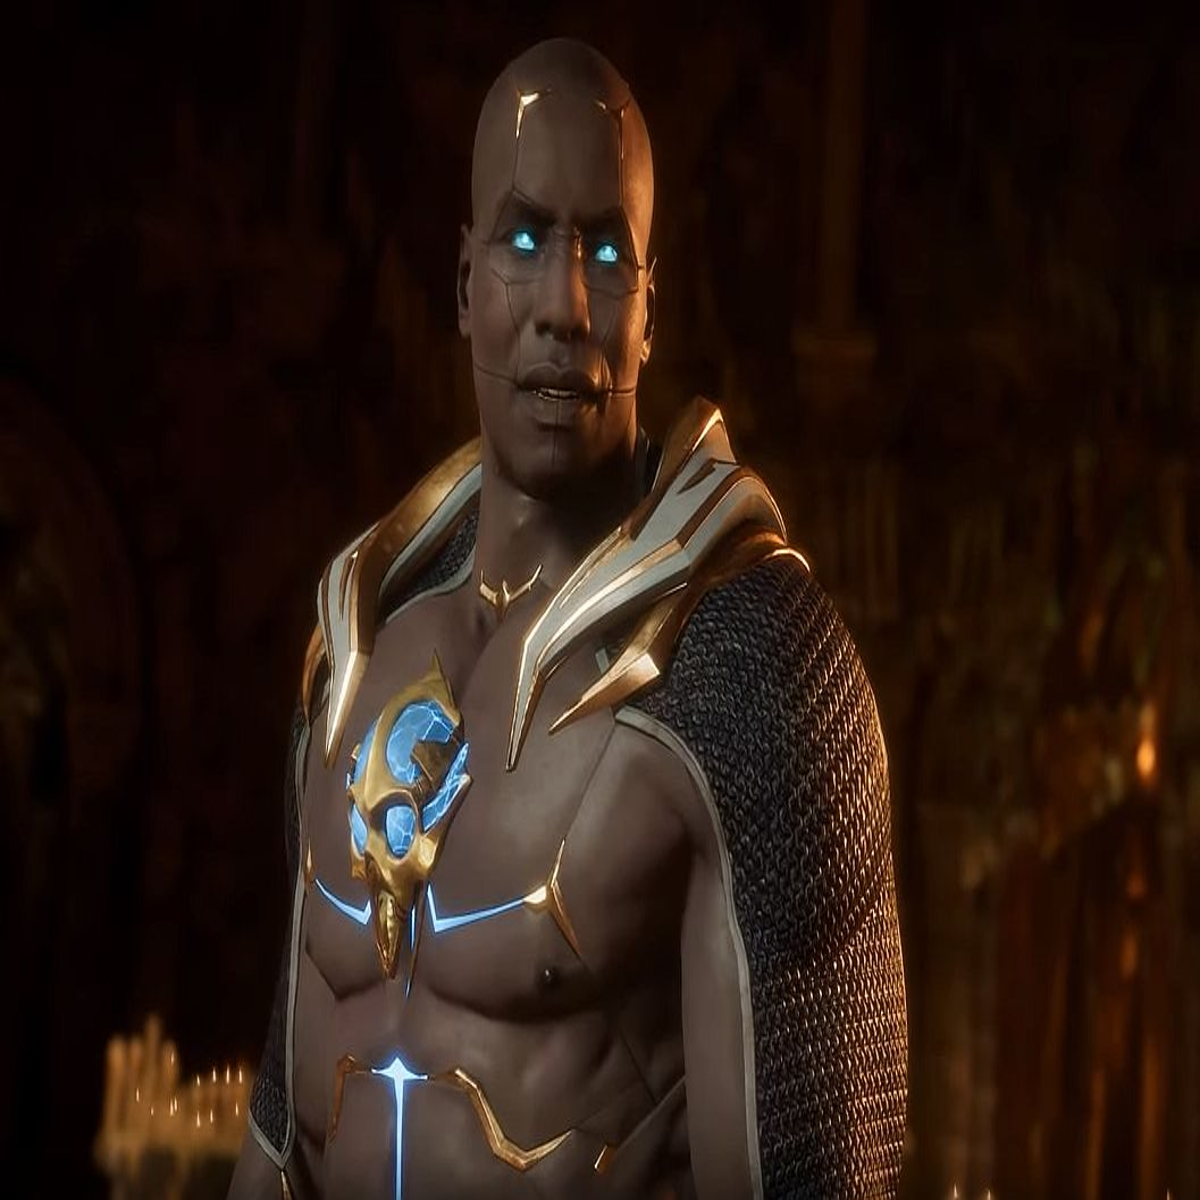 New Mortal Kombat 11 Character Called The Kollector Revealed in New Trailer